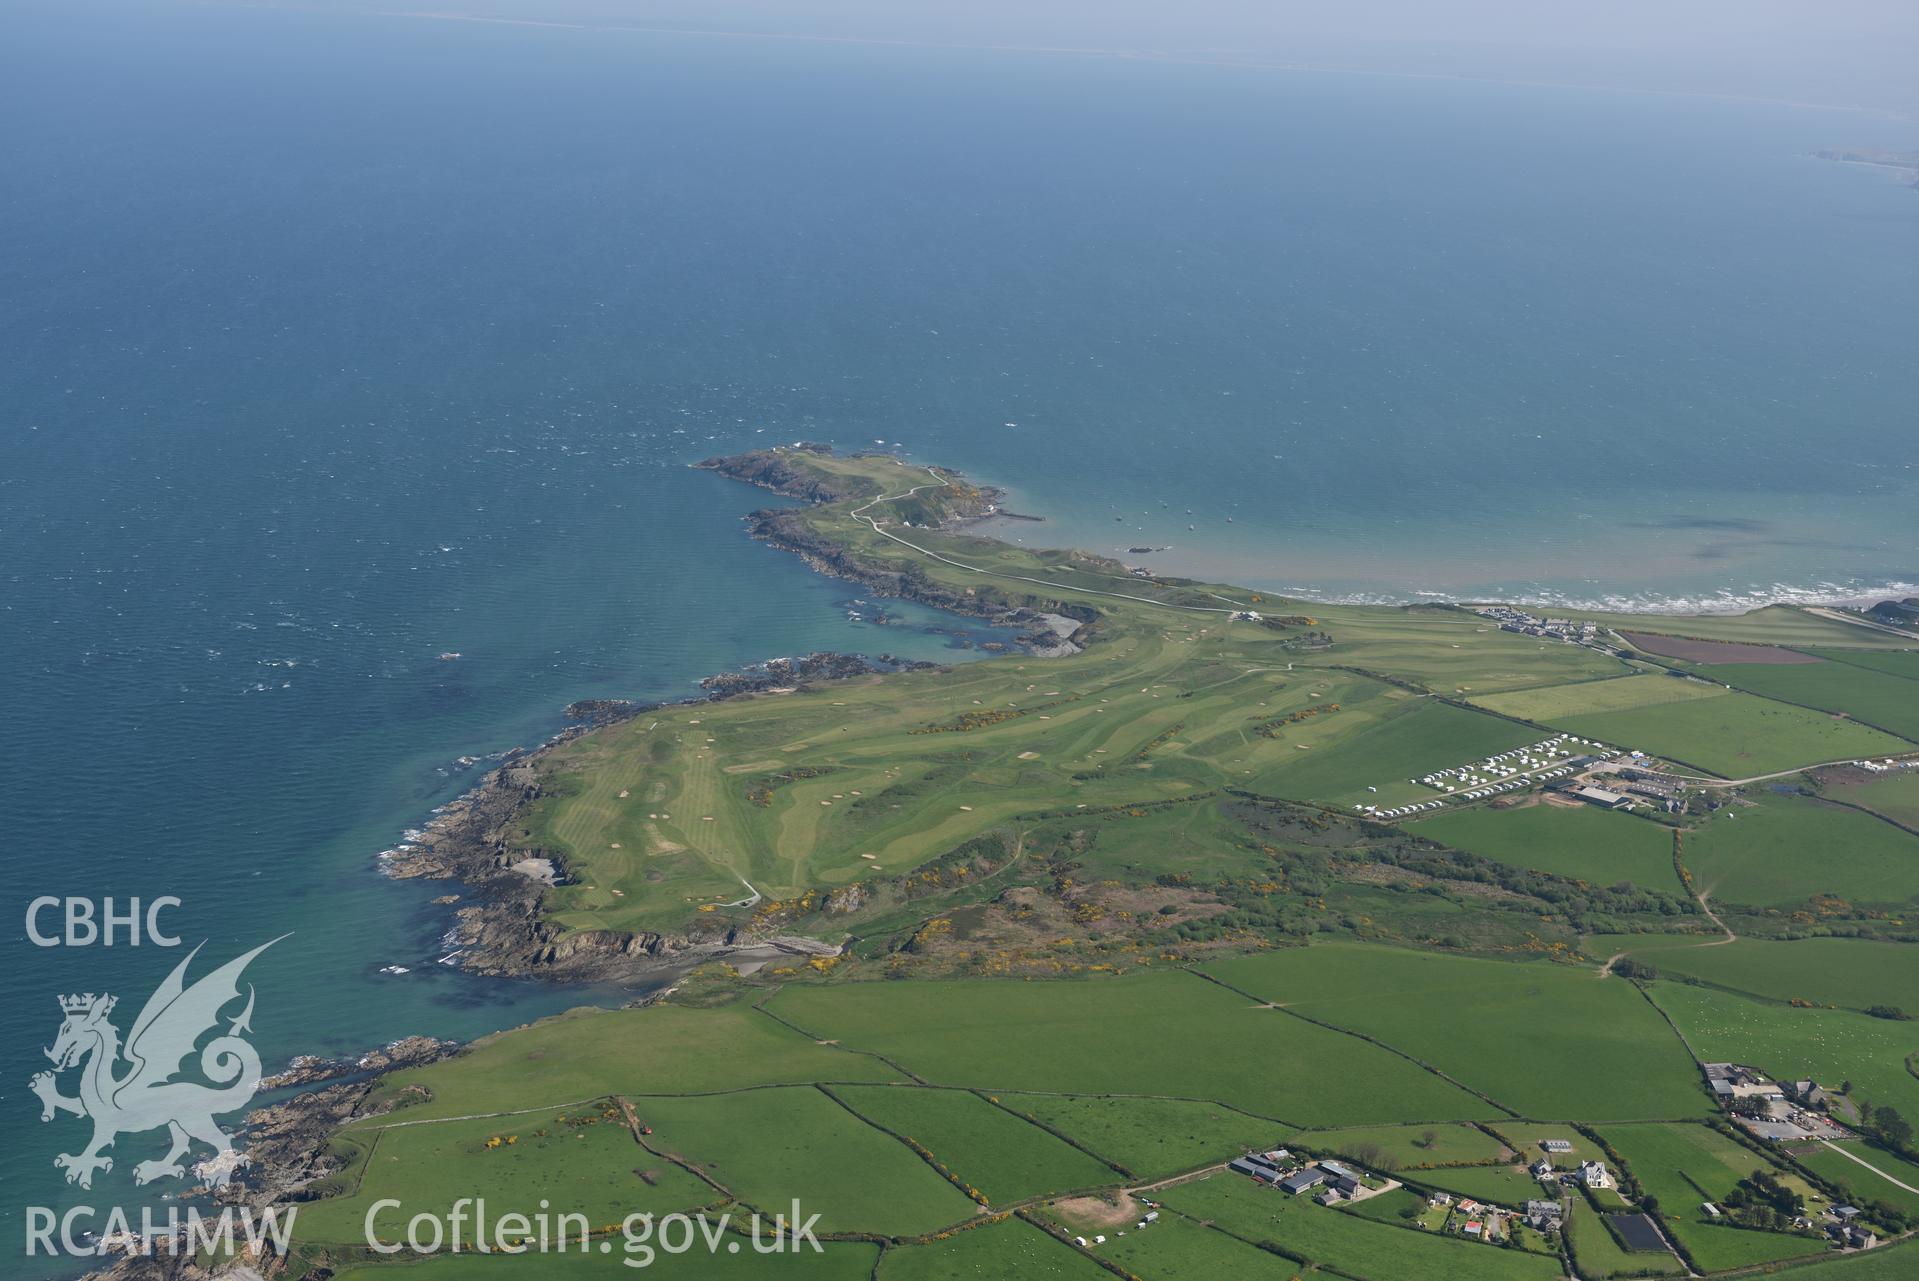 Aerial photography of Porth Dinllaen Farm taken on 3rd May 2017.  Baseline aerial reconnaissance survey for the CHERISH Project. ? Crown: CHERISH PROJECT 2017. Produced with EU funds through the Ireland Wales Co-operation Programme 2014-2020. All material made freely available through the Open Government Licence.